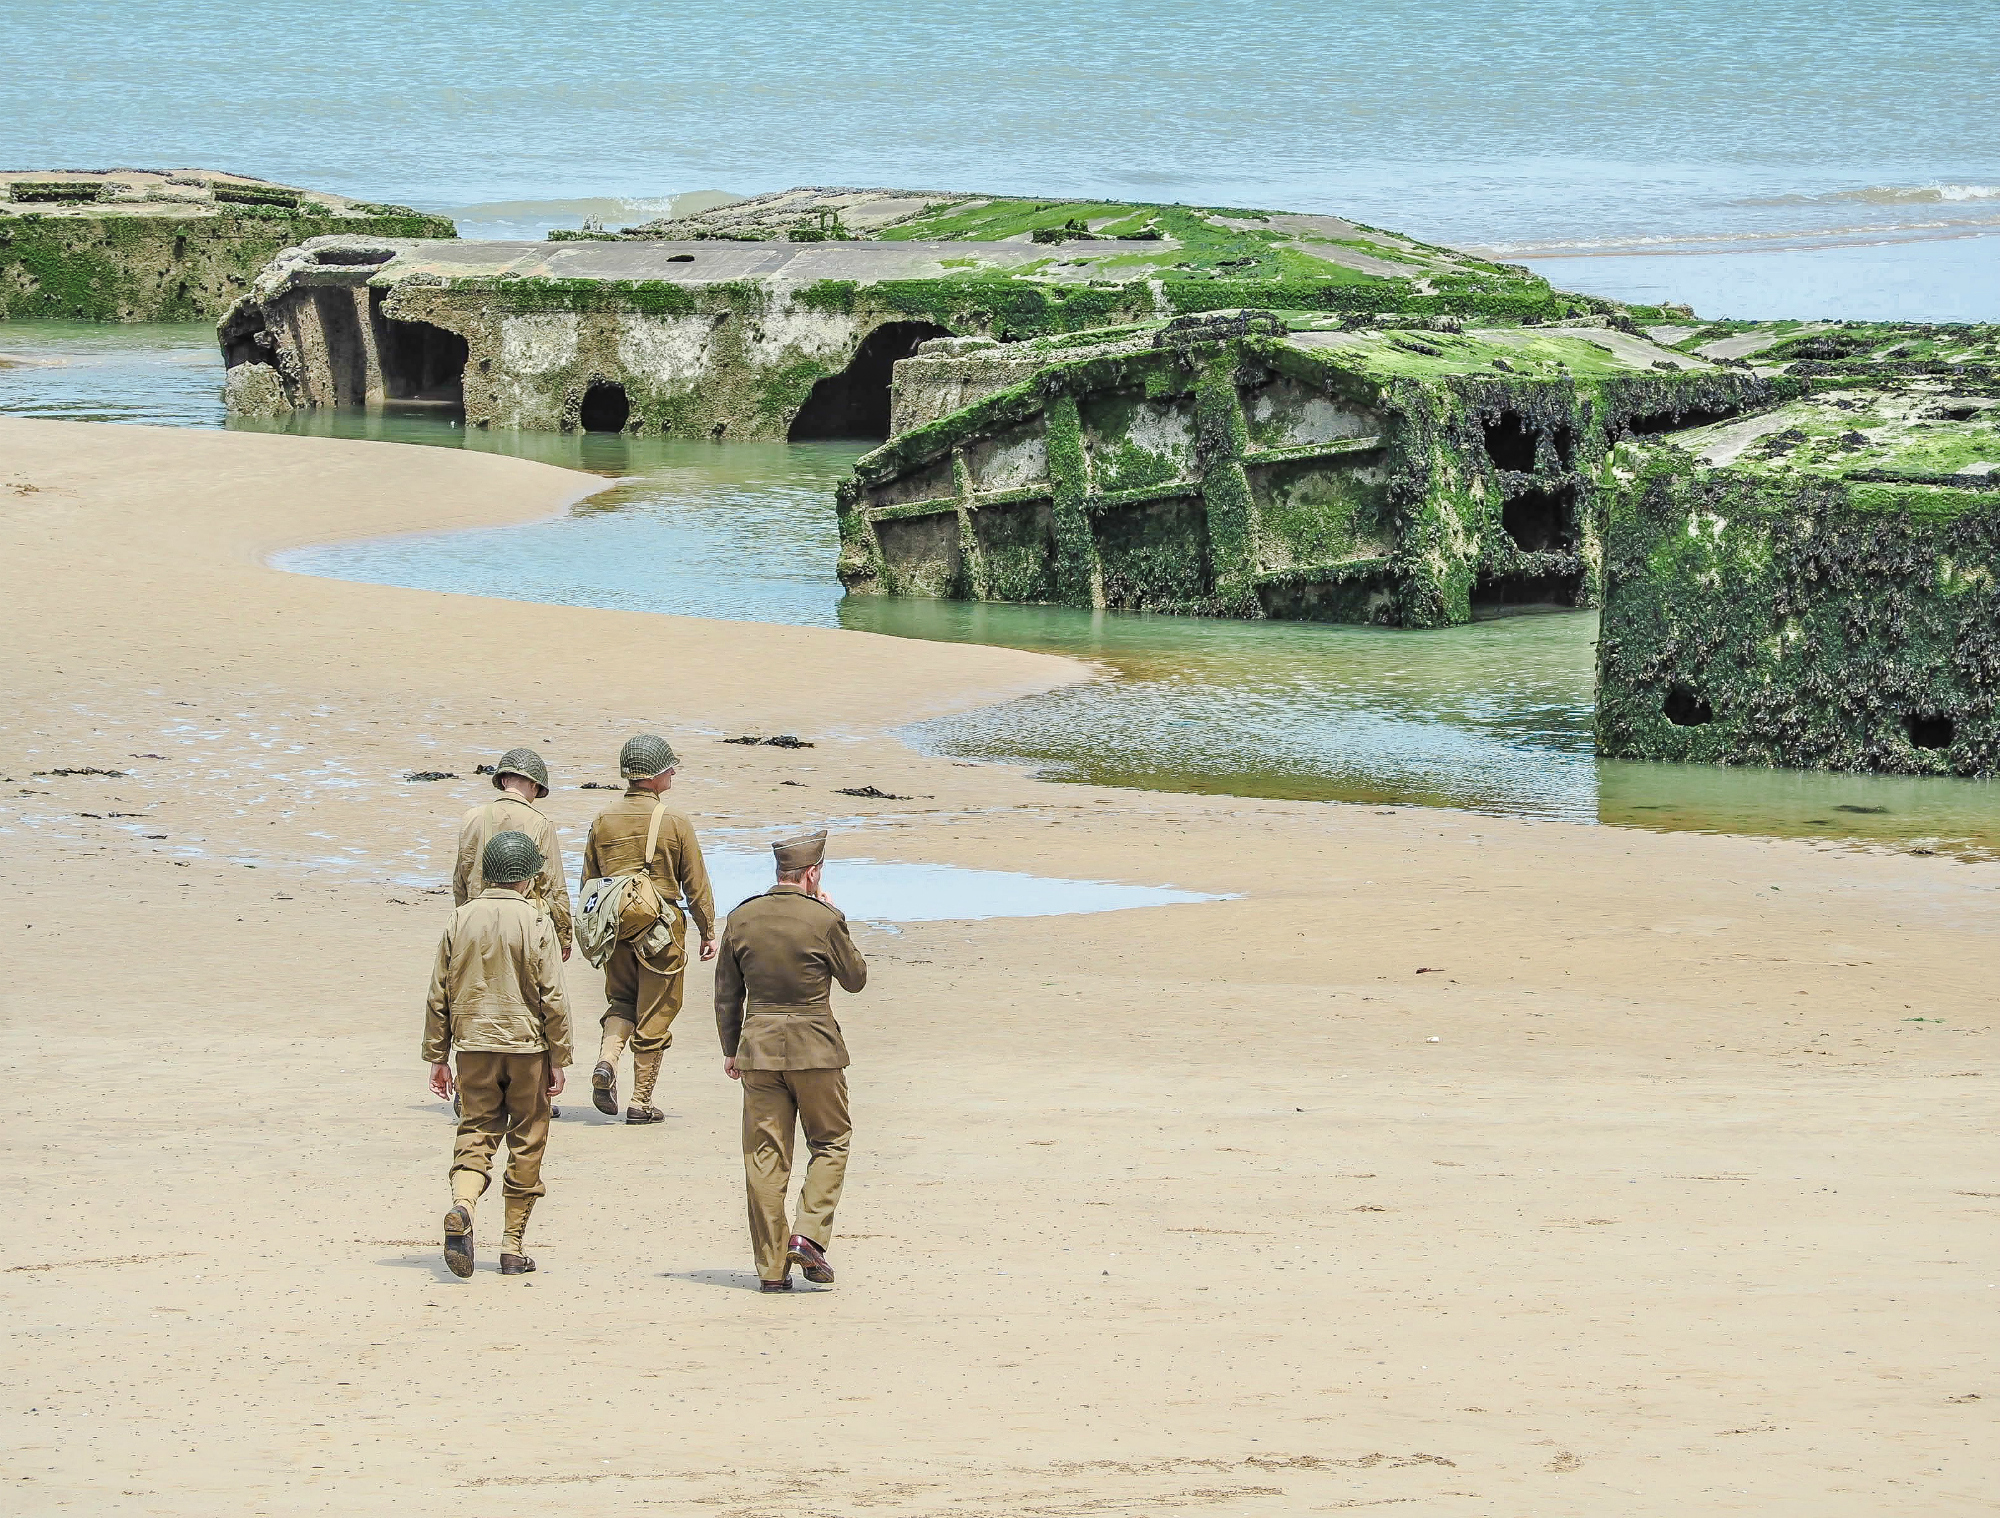 7 of the Best D-Day Sites to Visit in Normandy If You Have Just 1 Day | Normandy, France WWII sites and World War II history | #wwii #normandy #dday #omahabeach